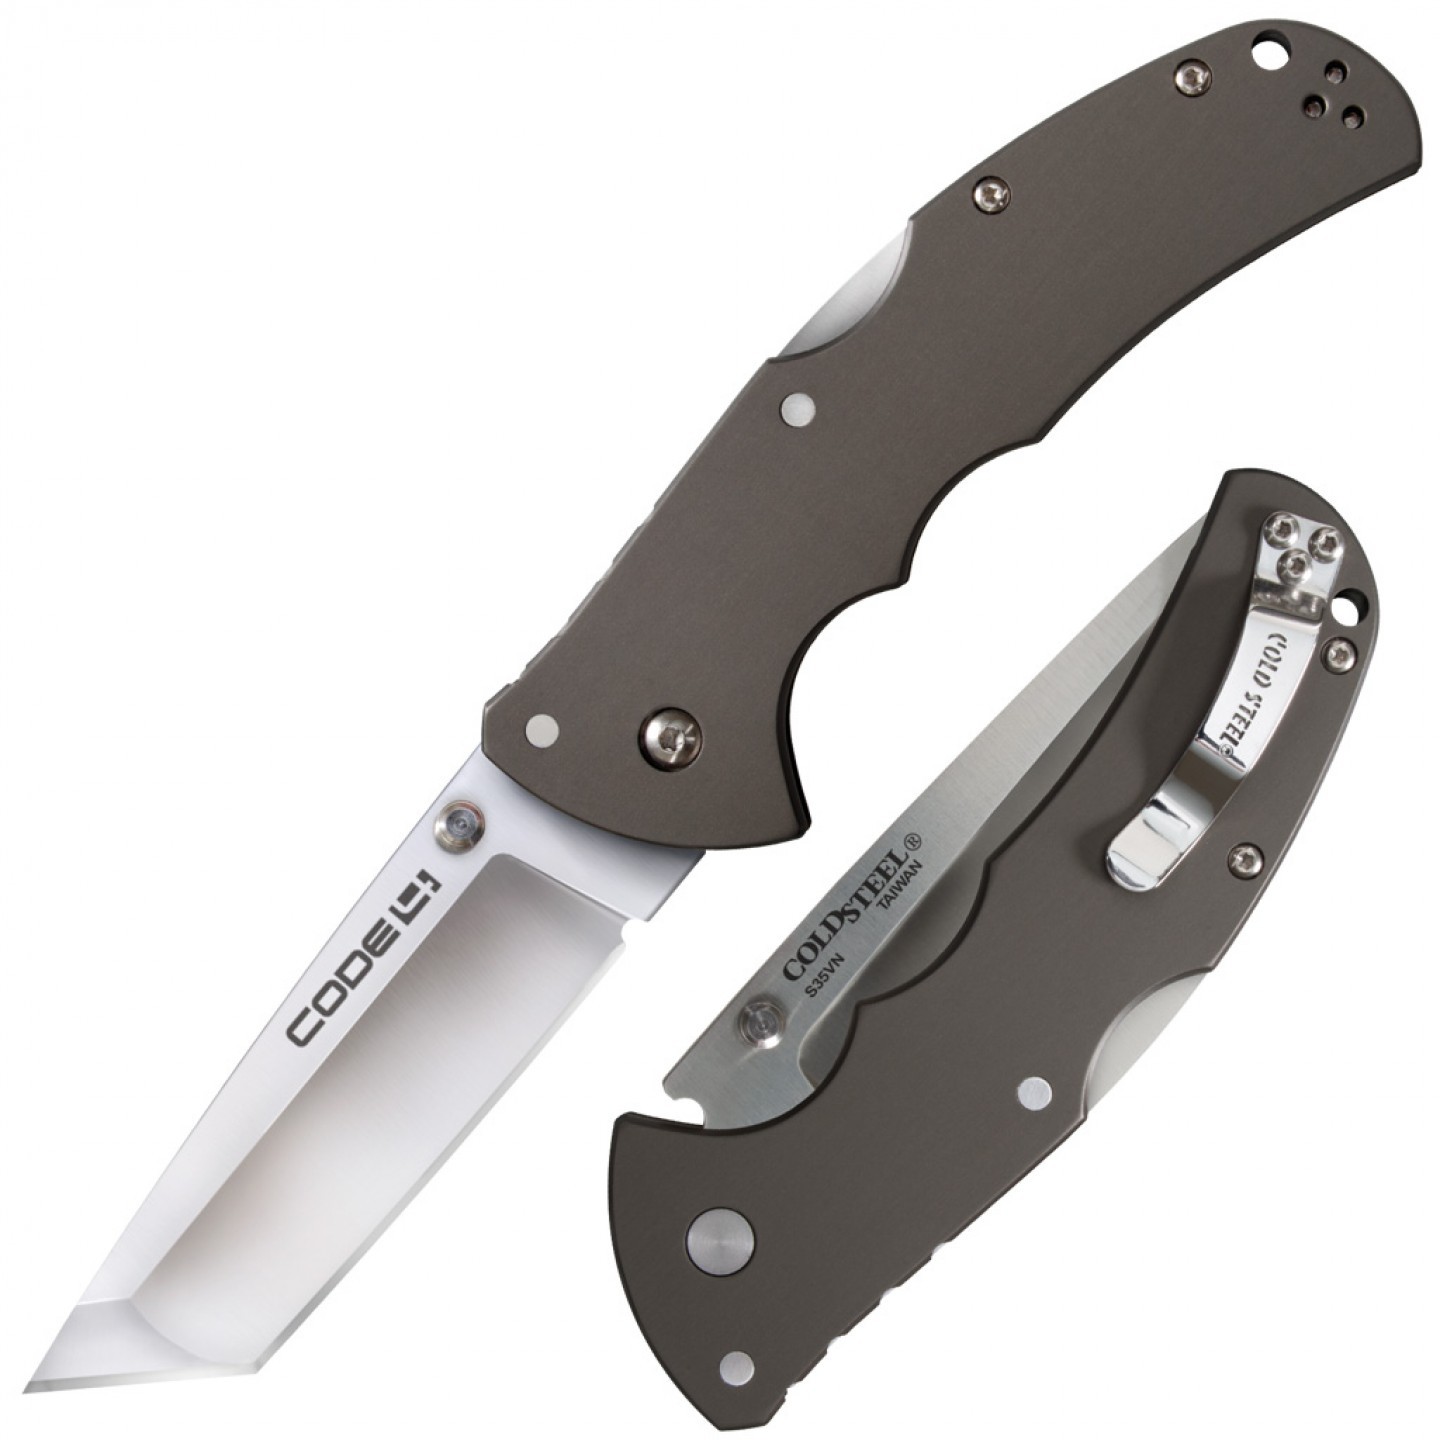   Code-4 Tanto Point - Cold Steel 58PT,  CPM-S35VN,  